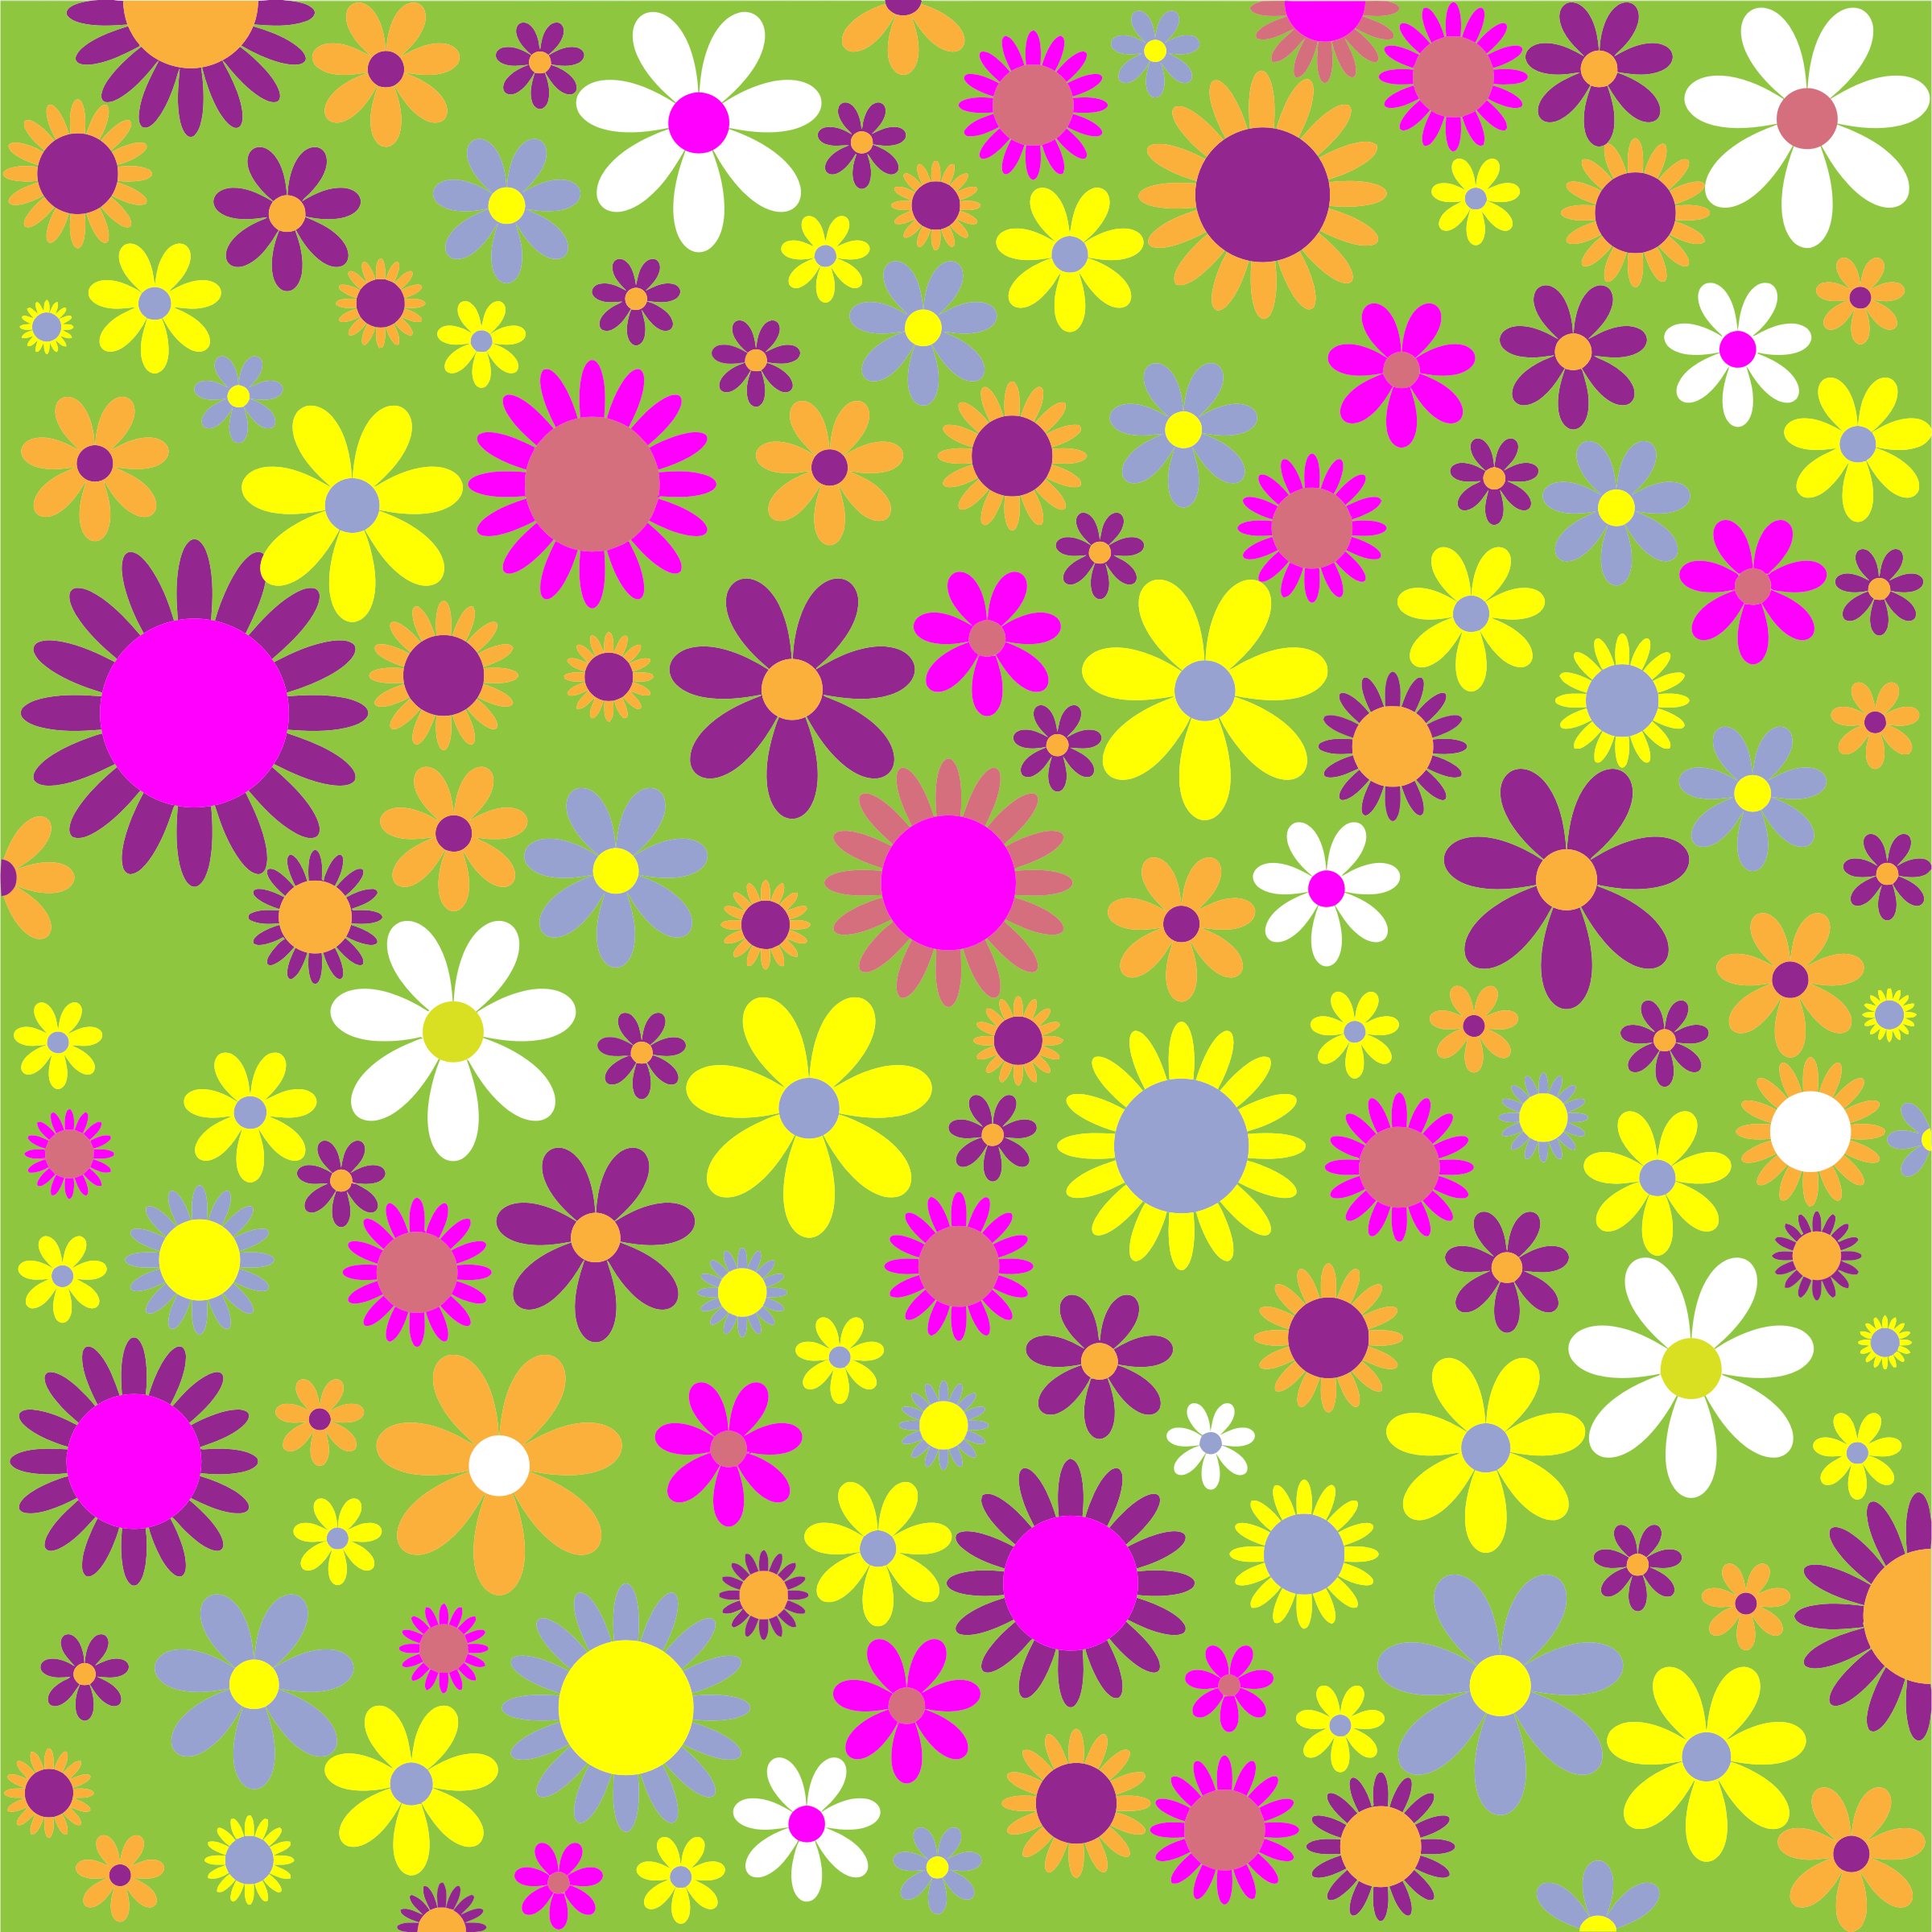 Free Background Floral Cliparts, Download Free Clip Art